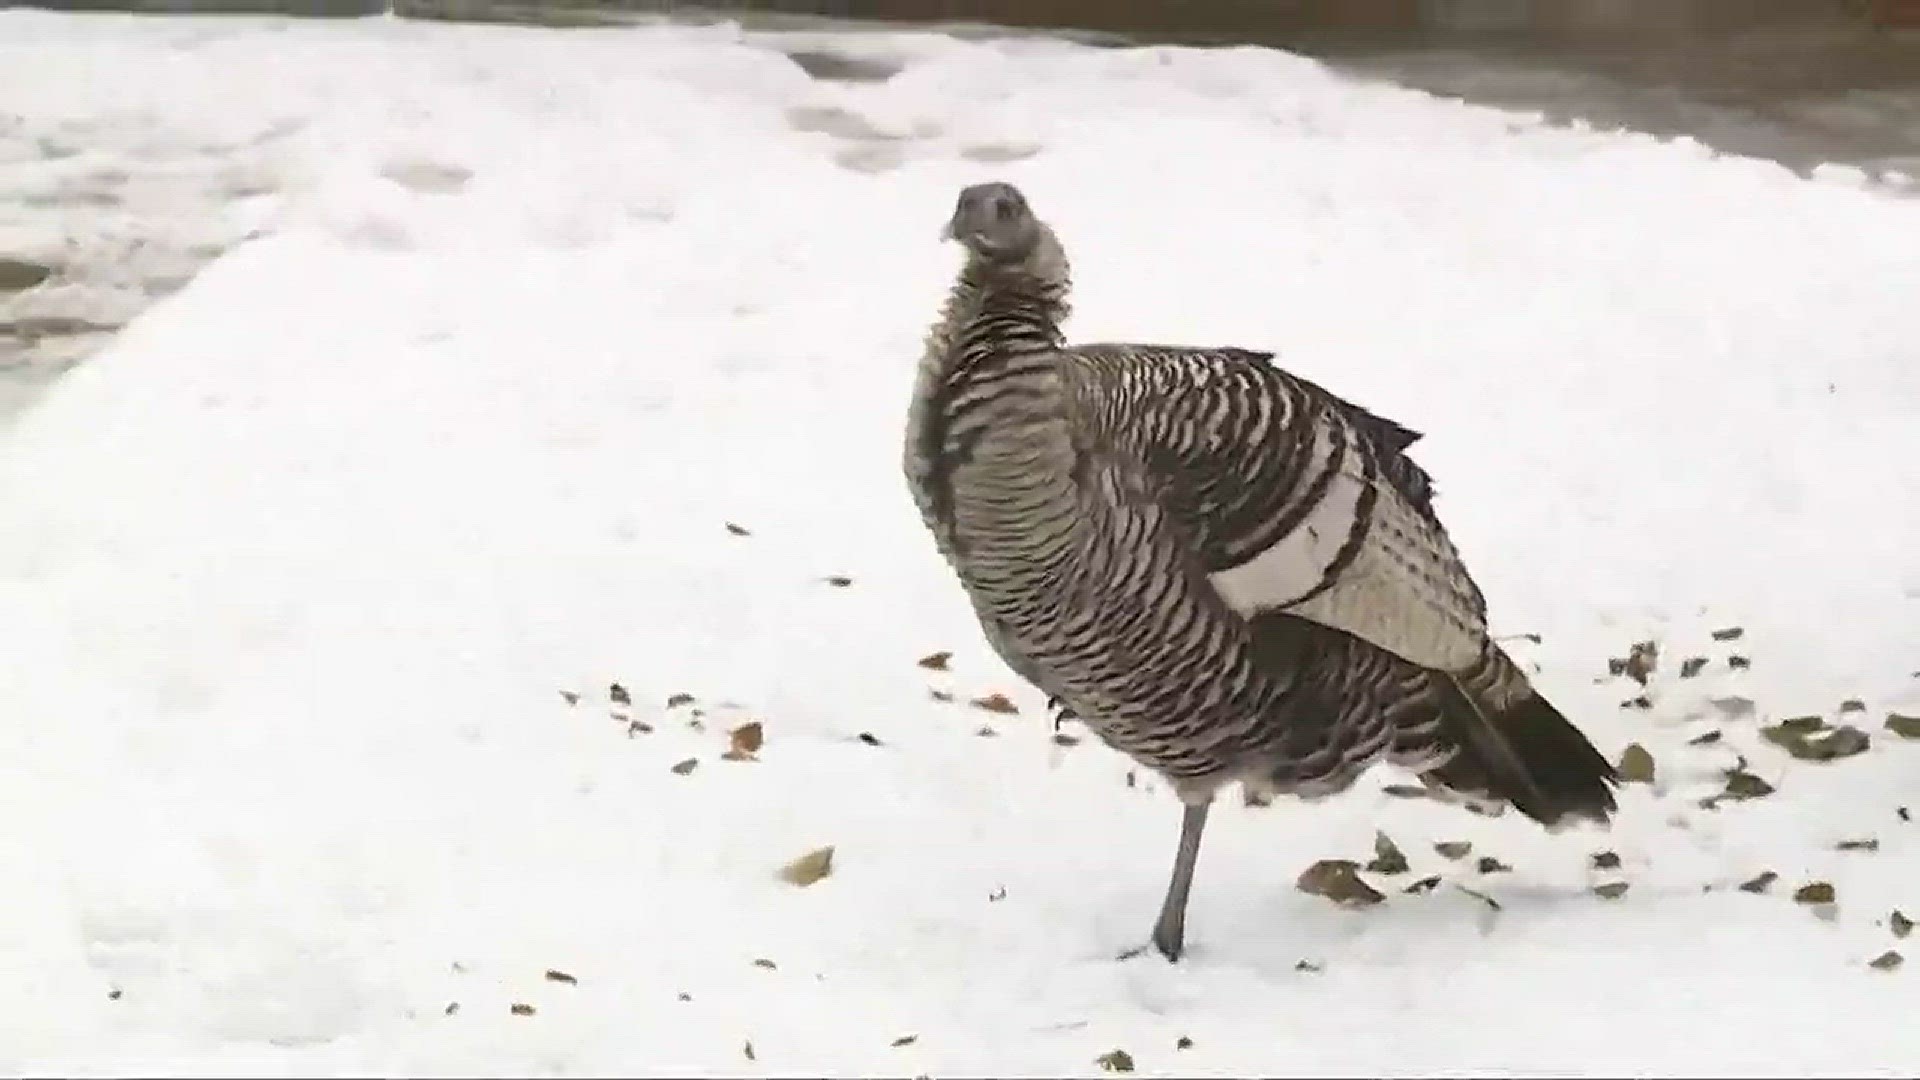 Wild turkeys disrupt mail delivery in Rocky River